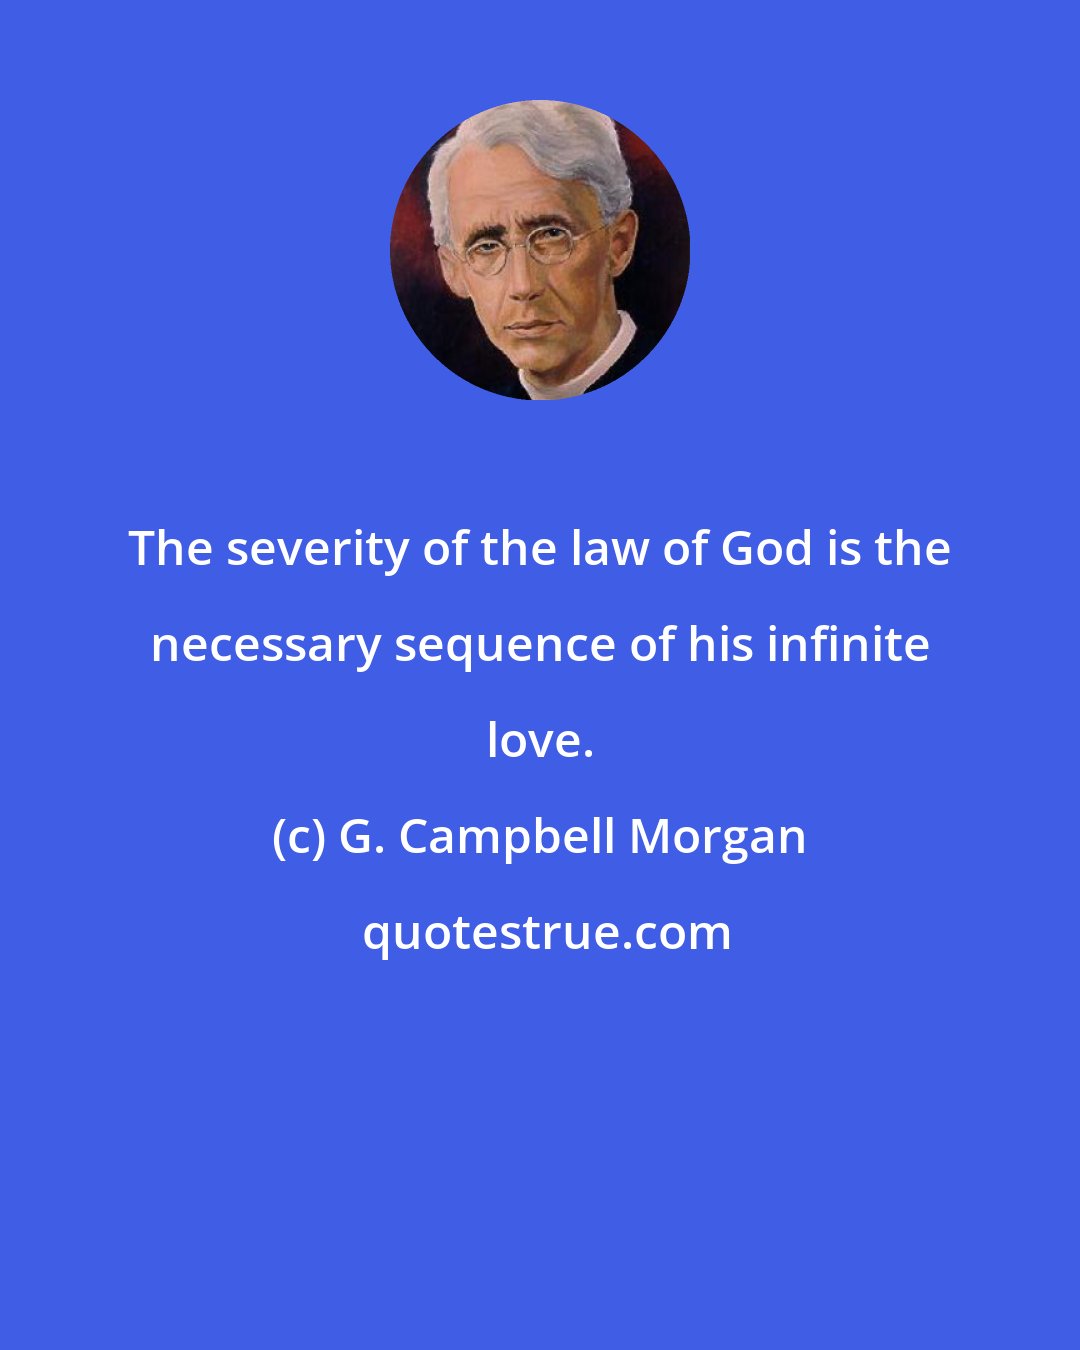 G. Campbell Morgan: The severity of the law of God is the necessary sequence of his infinite love.